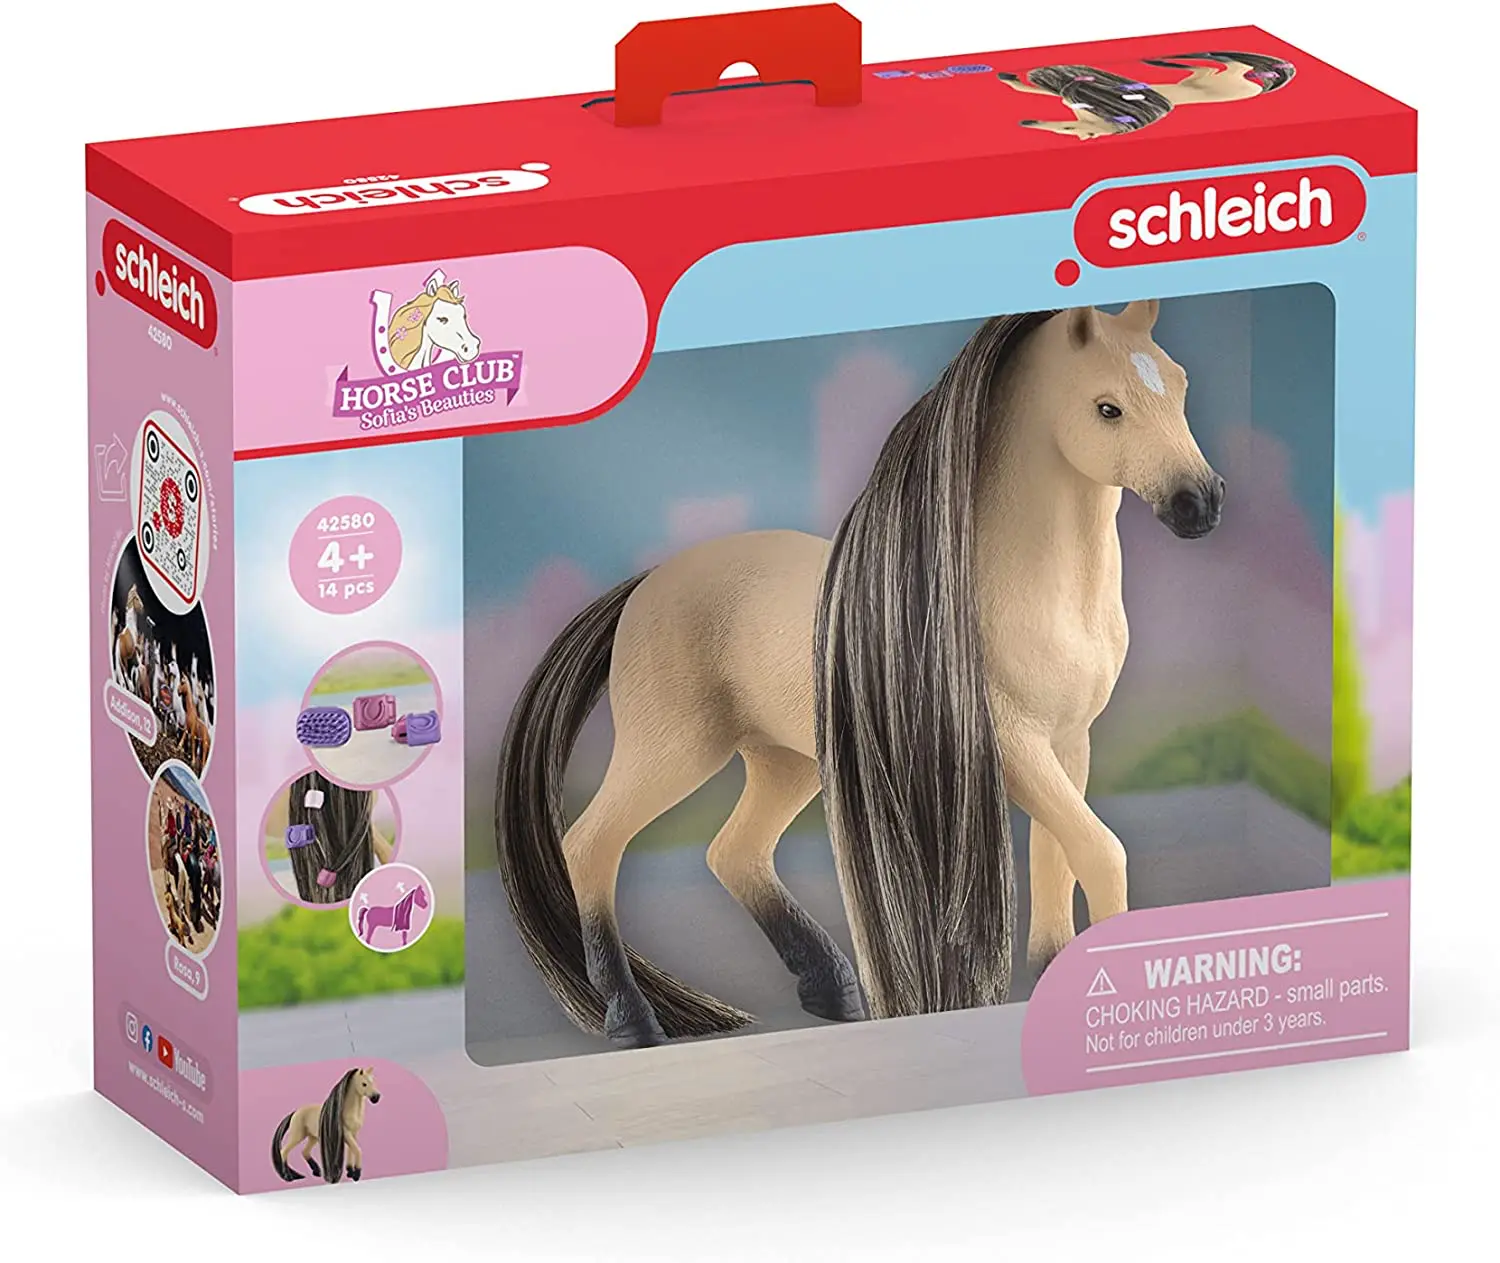 Beauty Horse Andalusier Stute - Schleich (42580) Horse Club